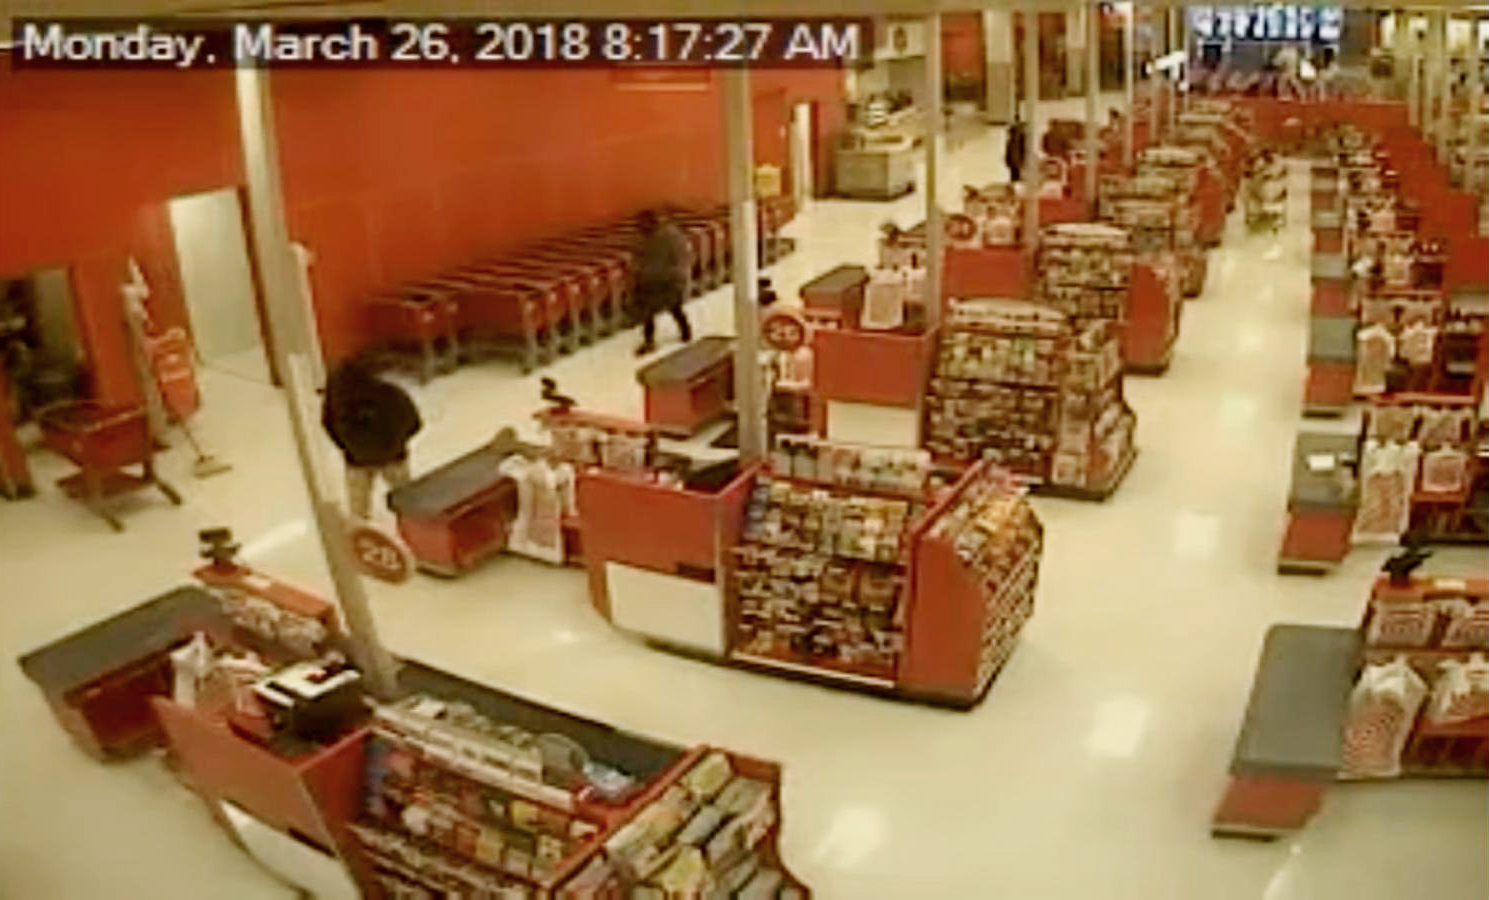 PHOTO: Police are seeking 2 suspects who got away with $350,000 from a Target store's vault on March 26, 2018 in New York.